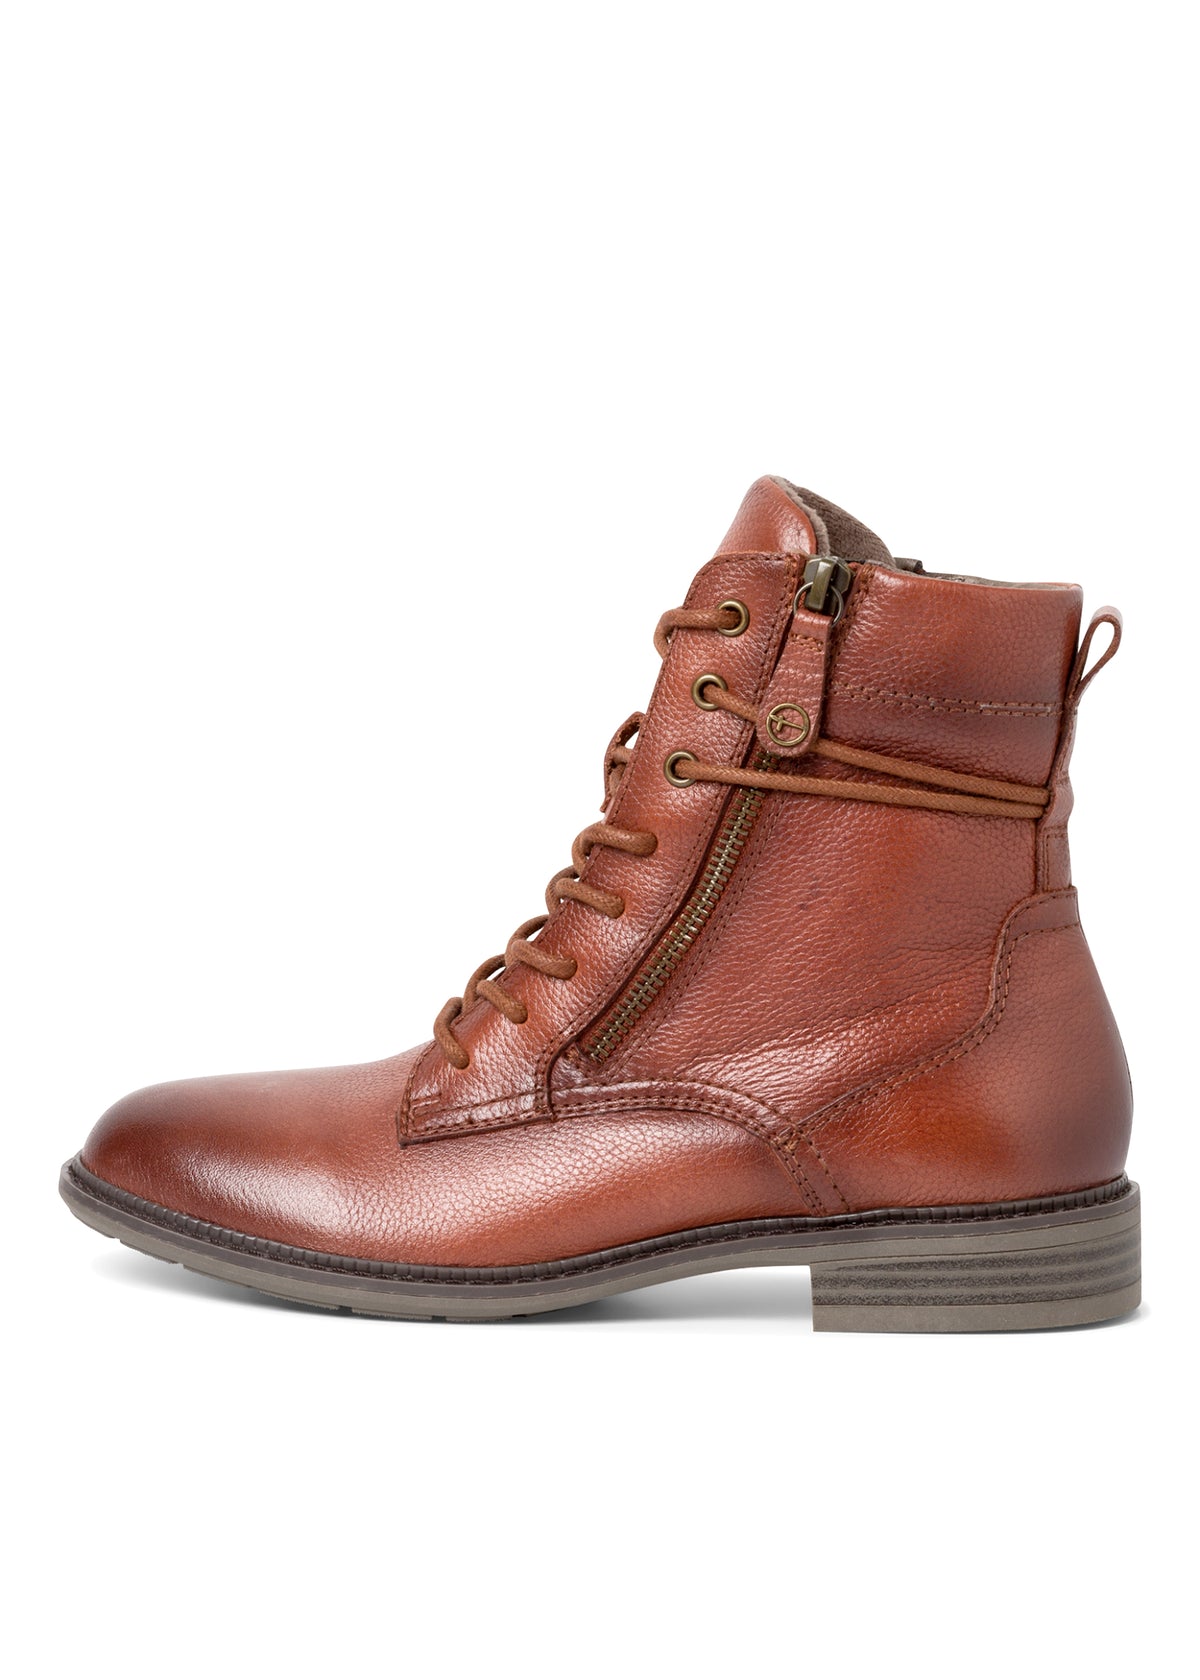 Ankle boots with a low heel - cognac brown